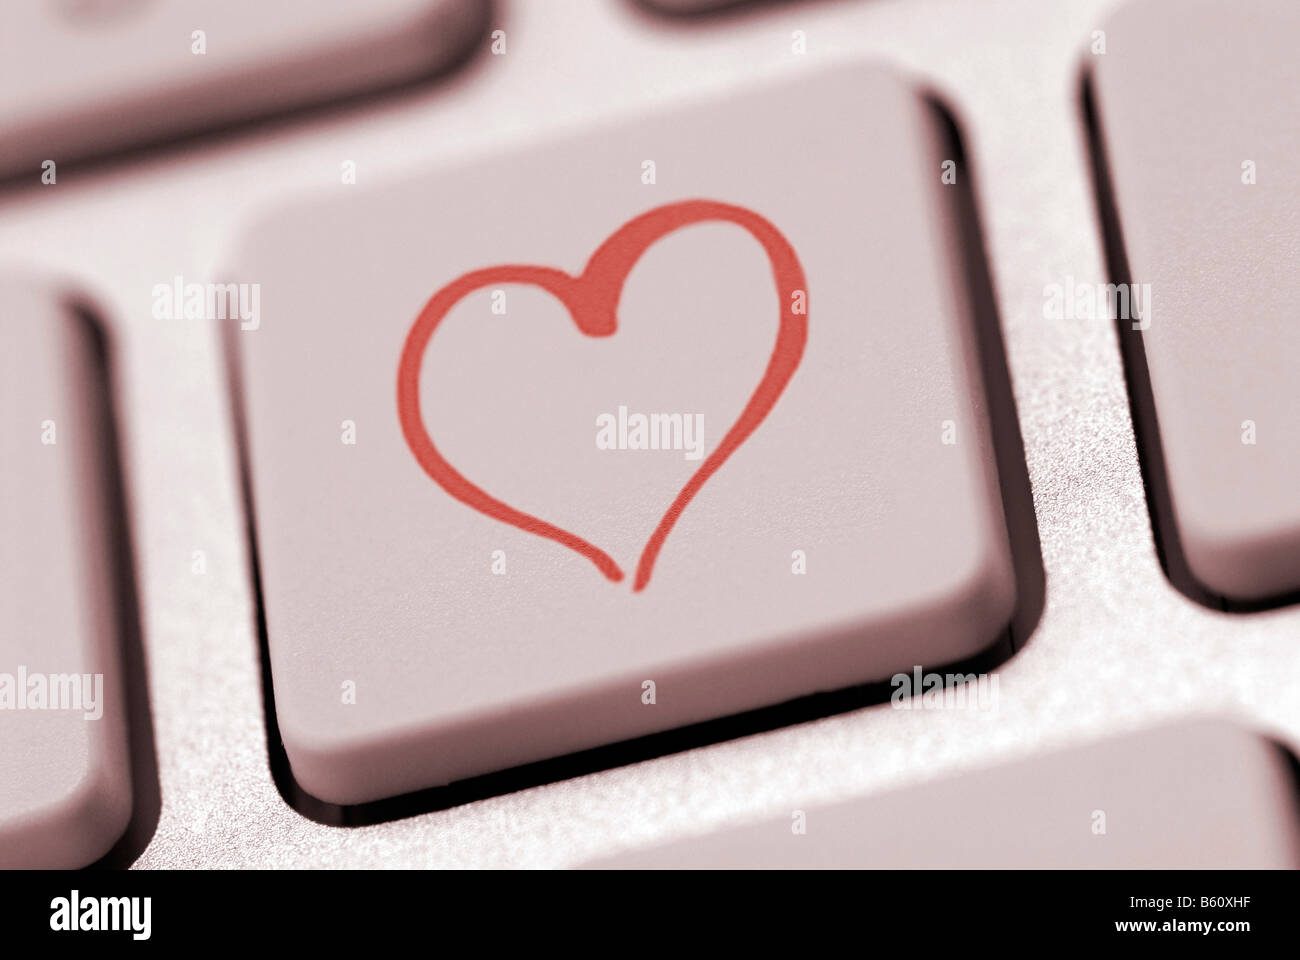 Heart shape on a computer keyboard, symbolic image for internet dating  Stock Photo - Alamy